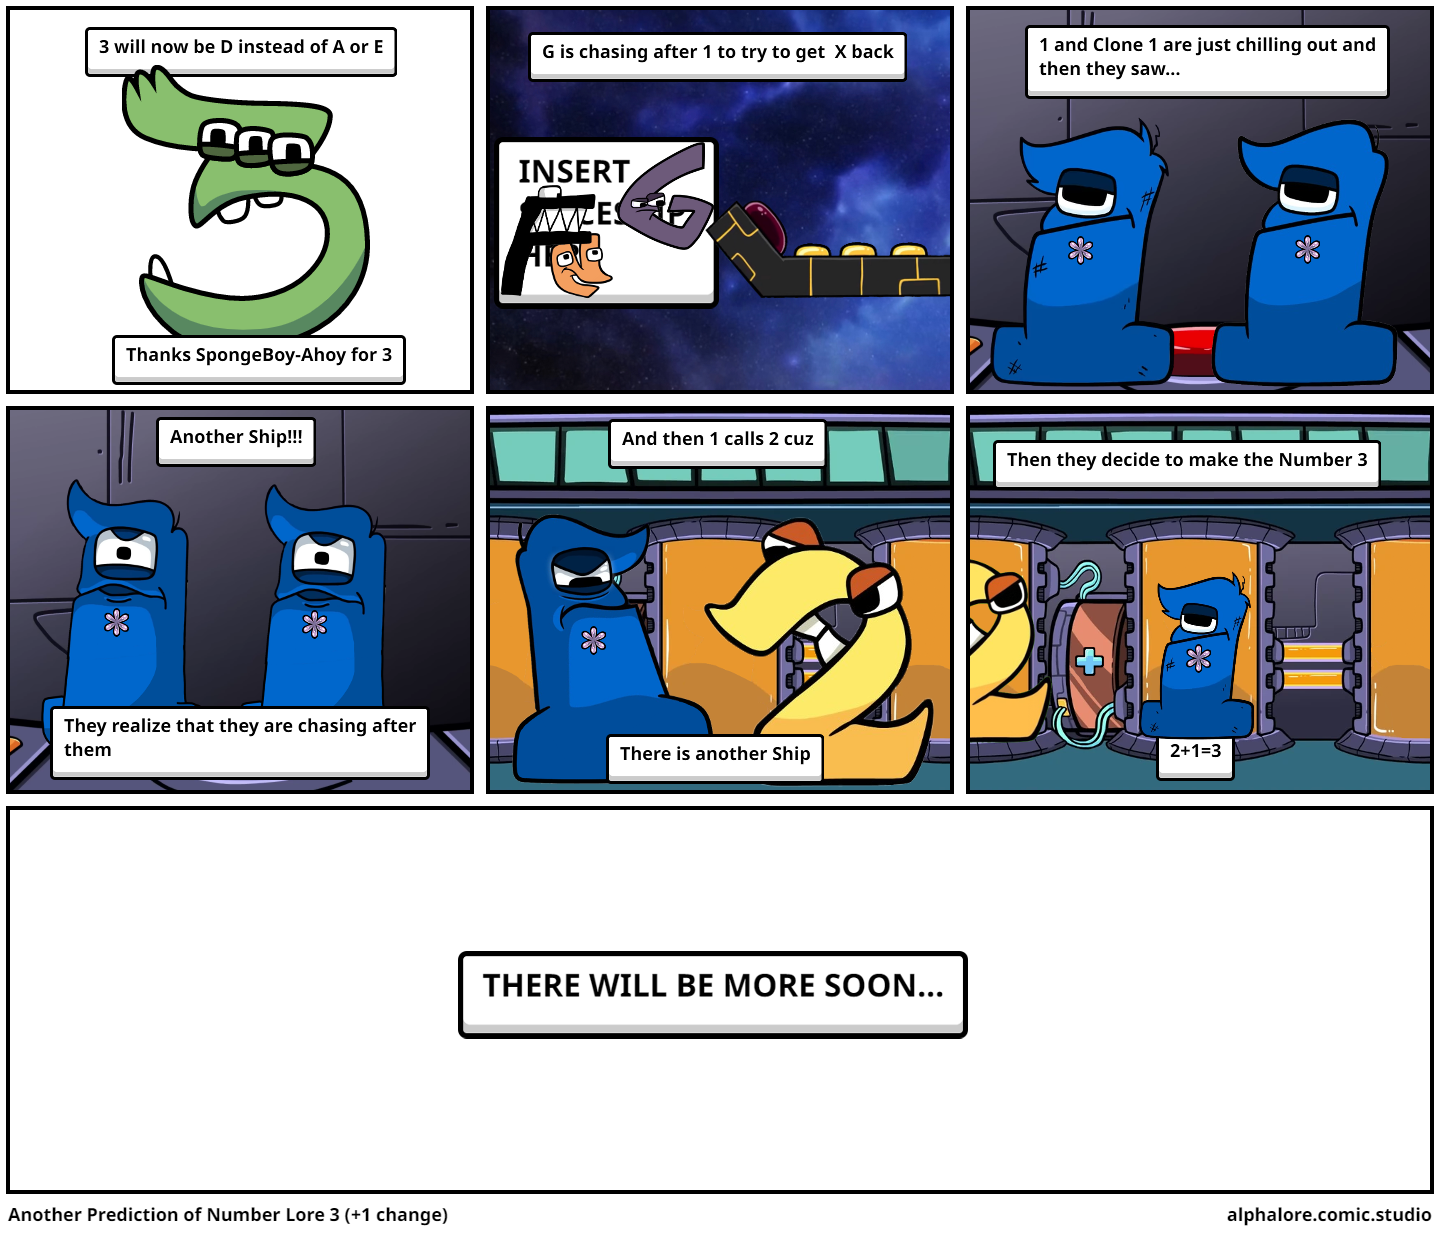 Another Prediction of Number Lore 3 (+1 change) - Comic Studio